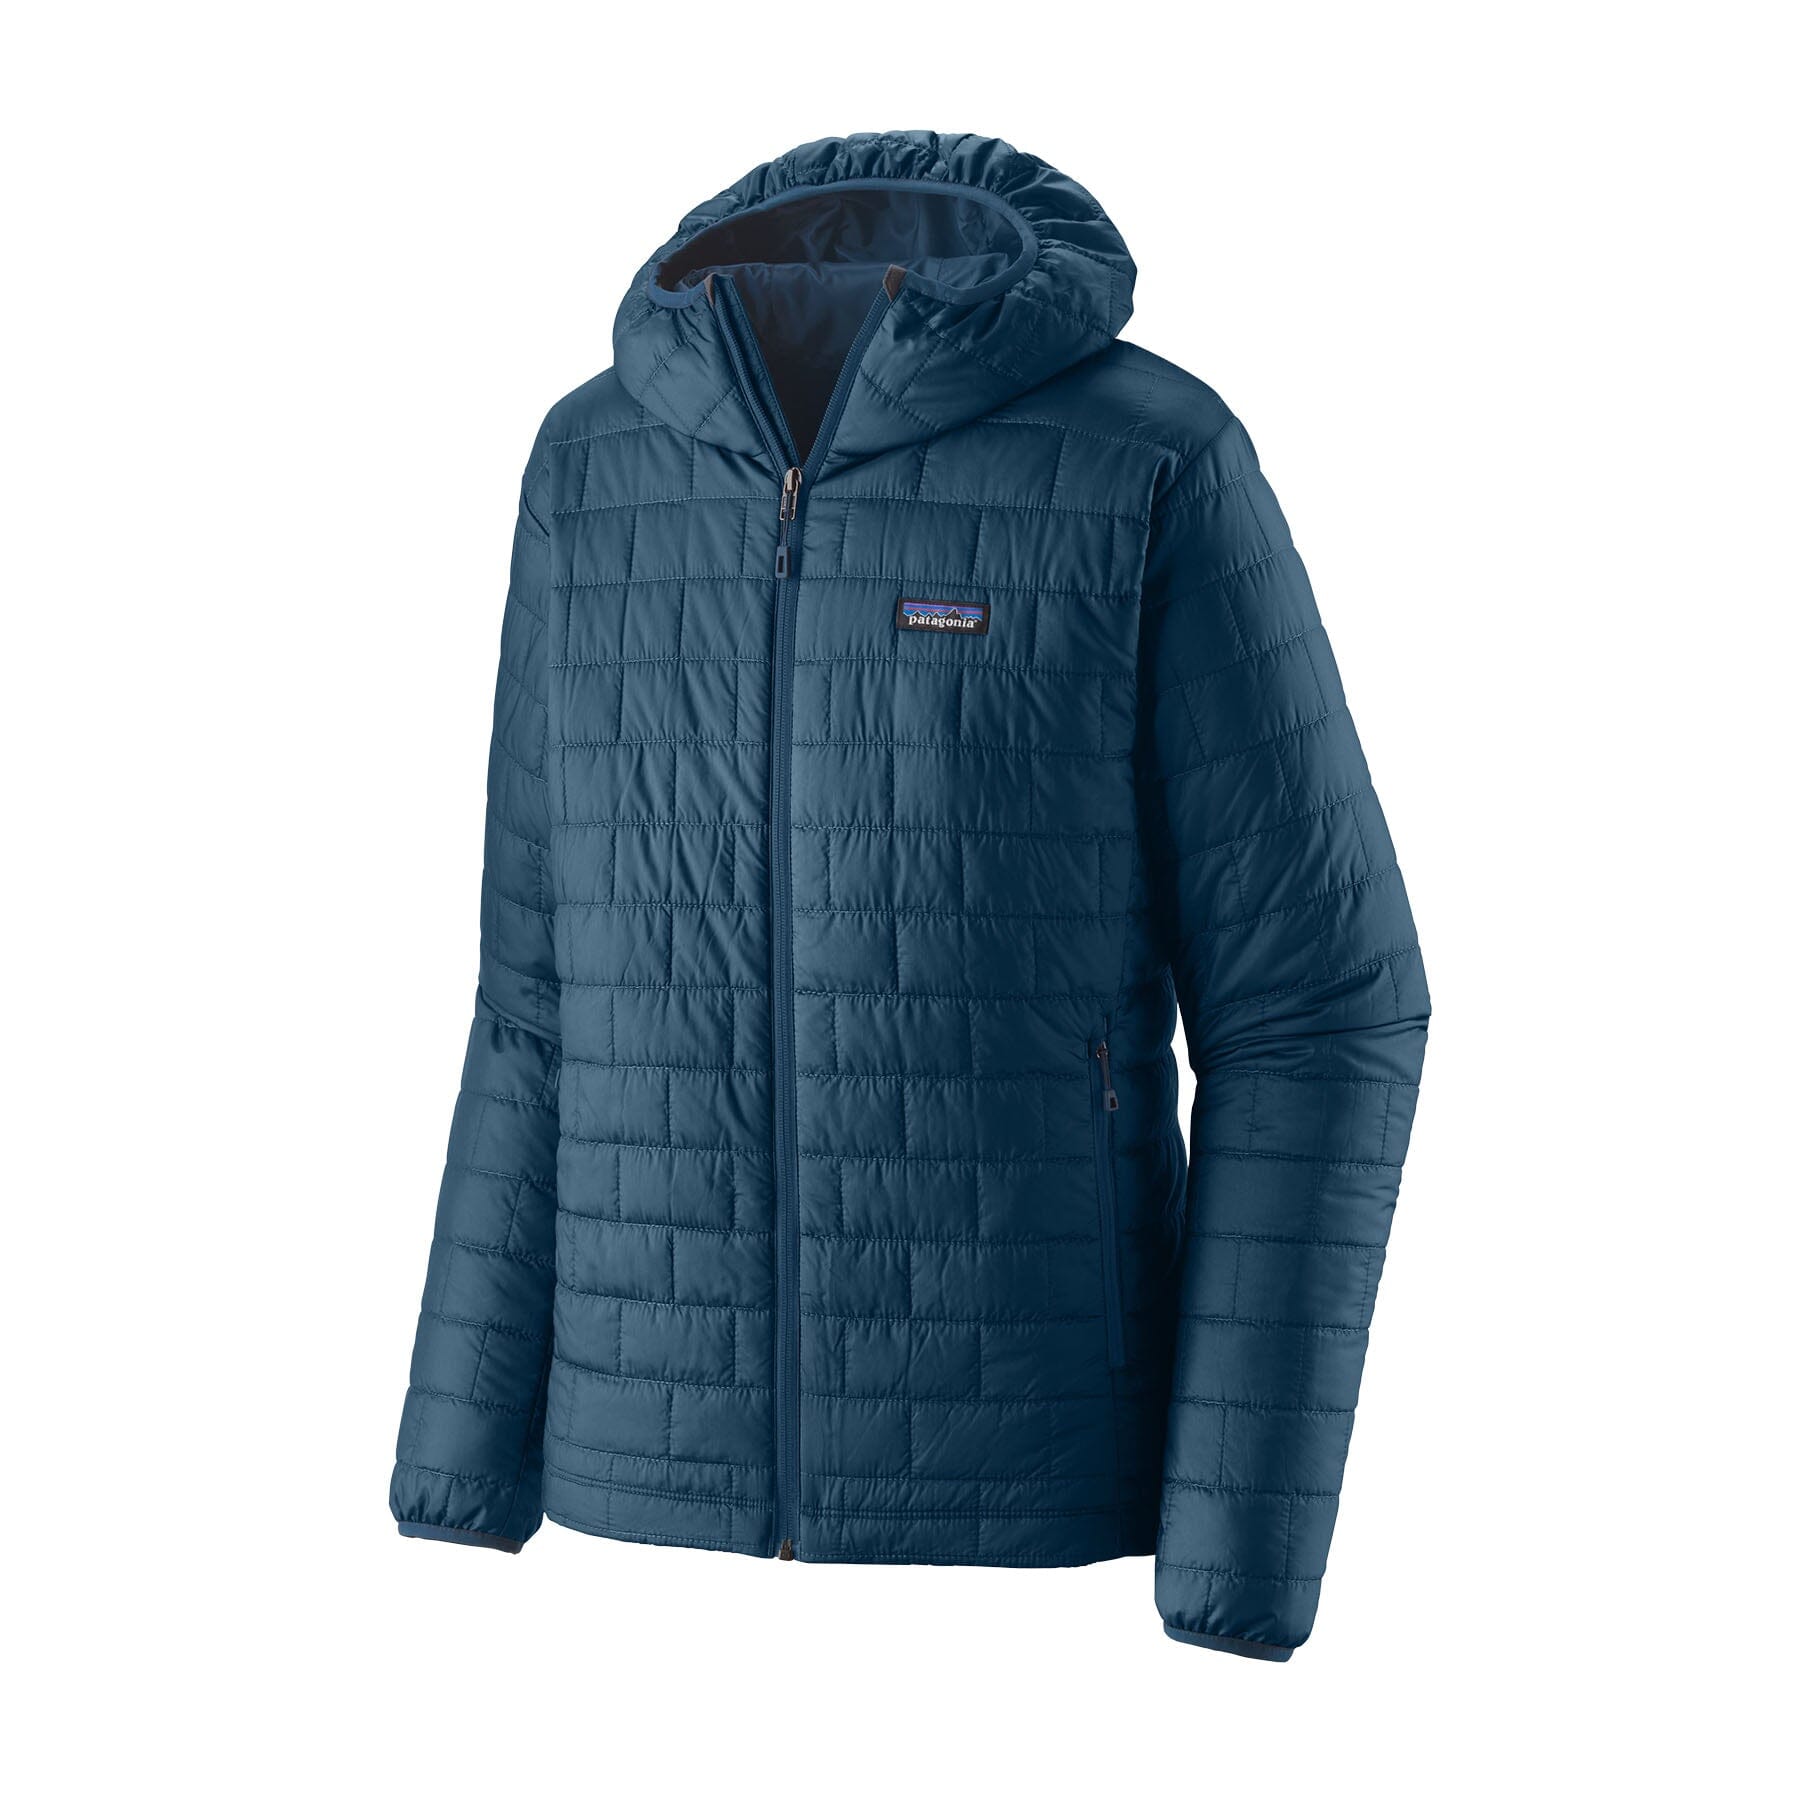 Patagonia Men's Nano Puff Hoody - 100% Recycled Polyester